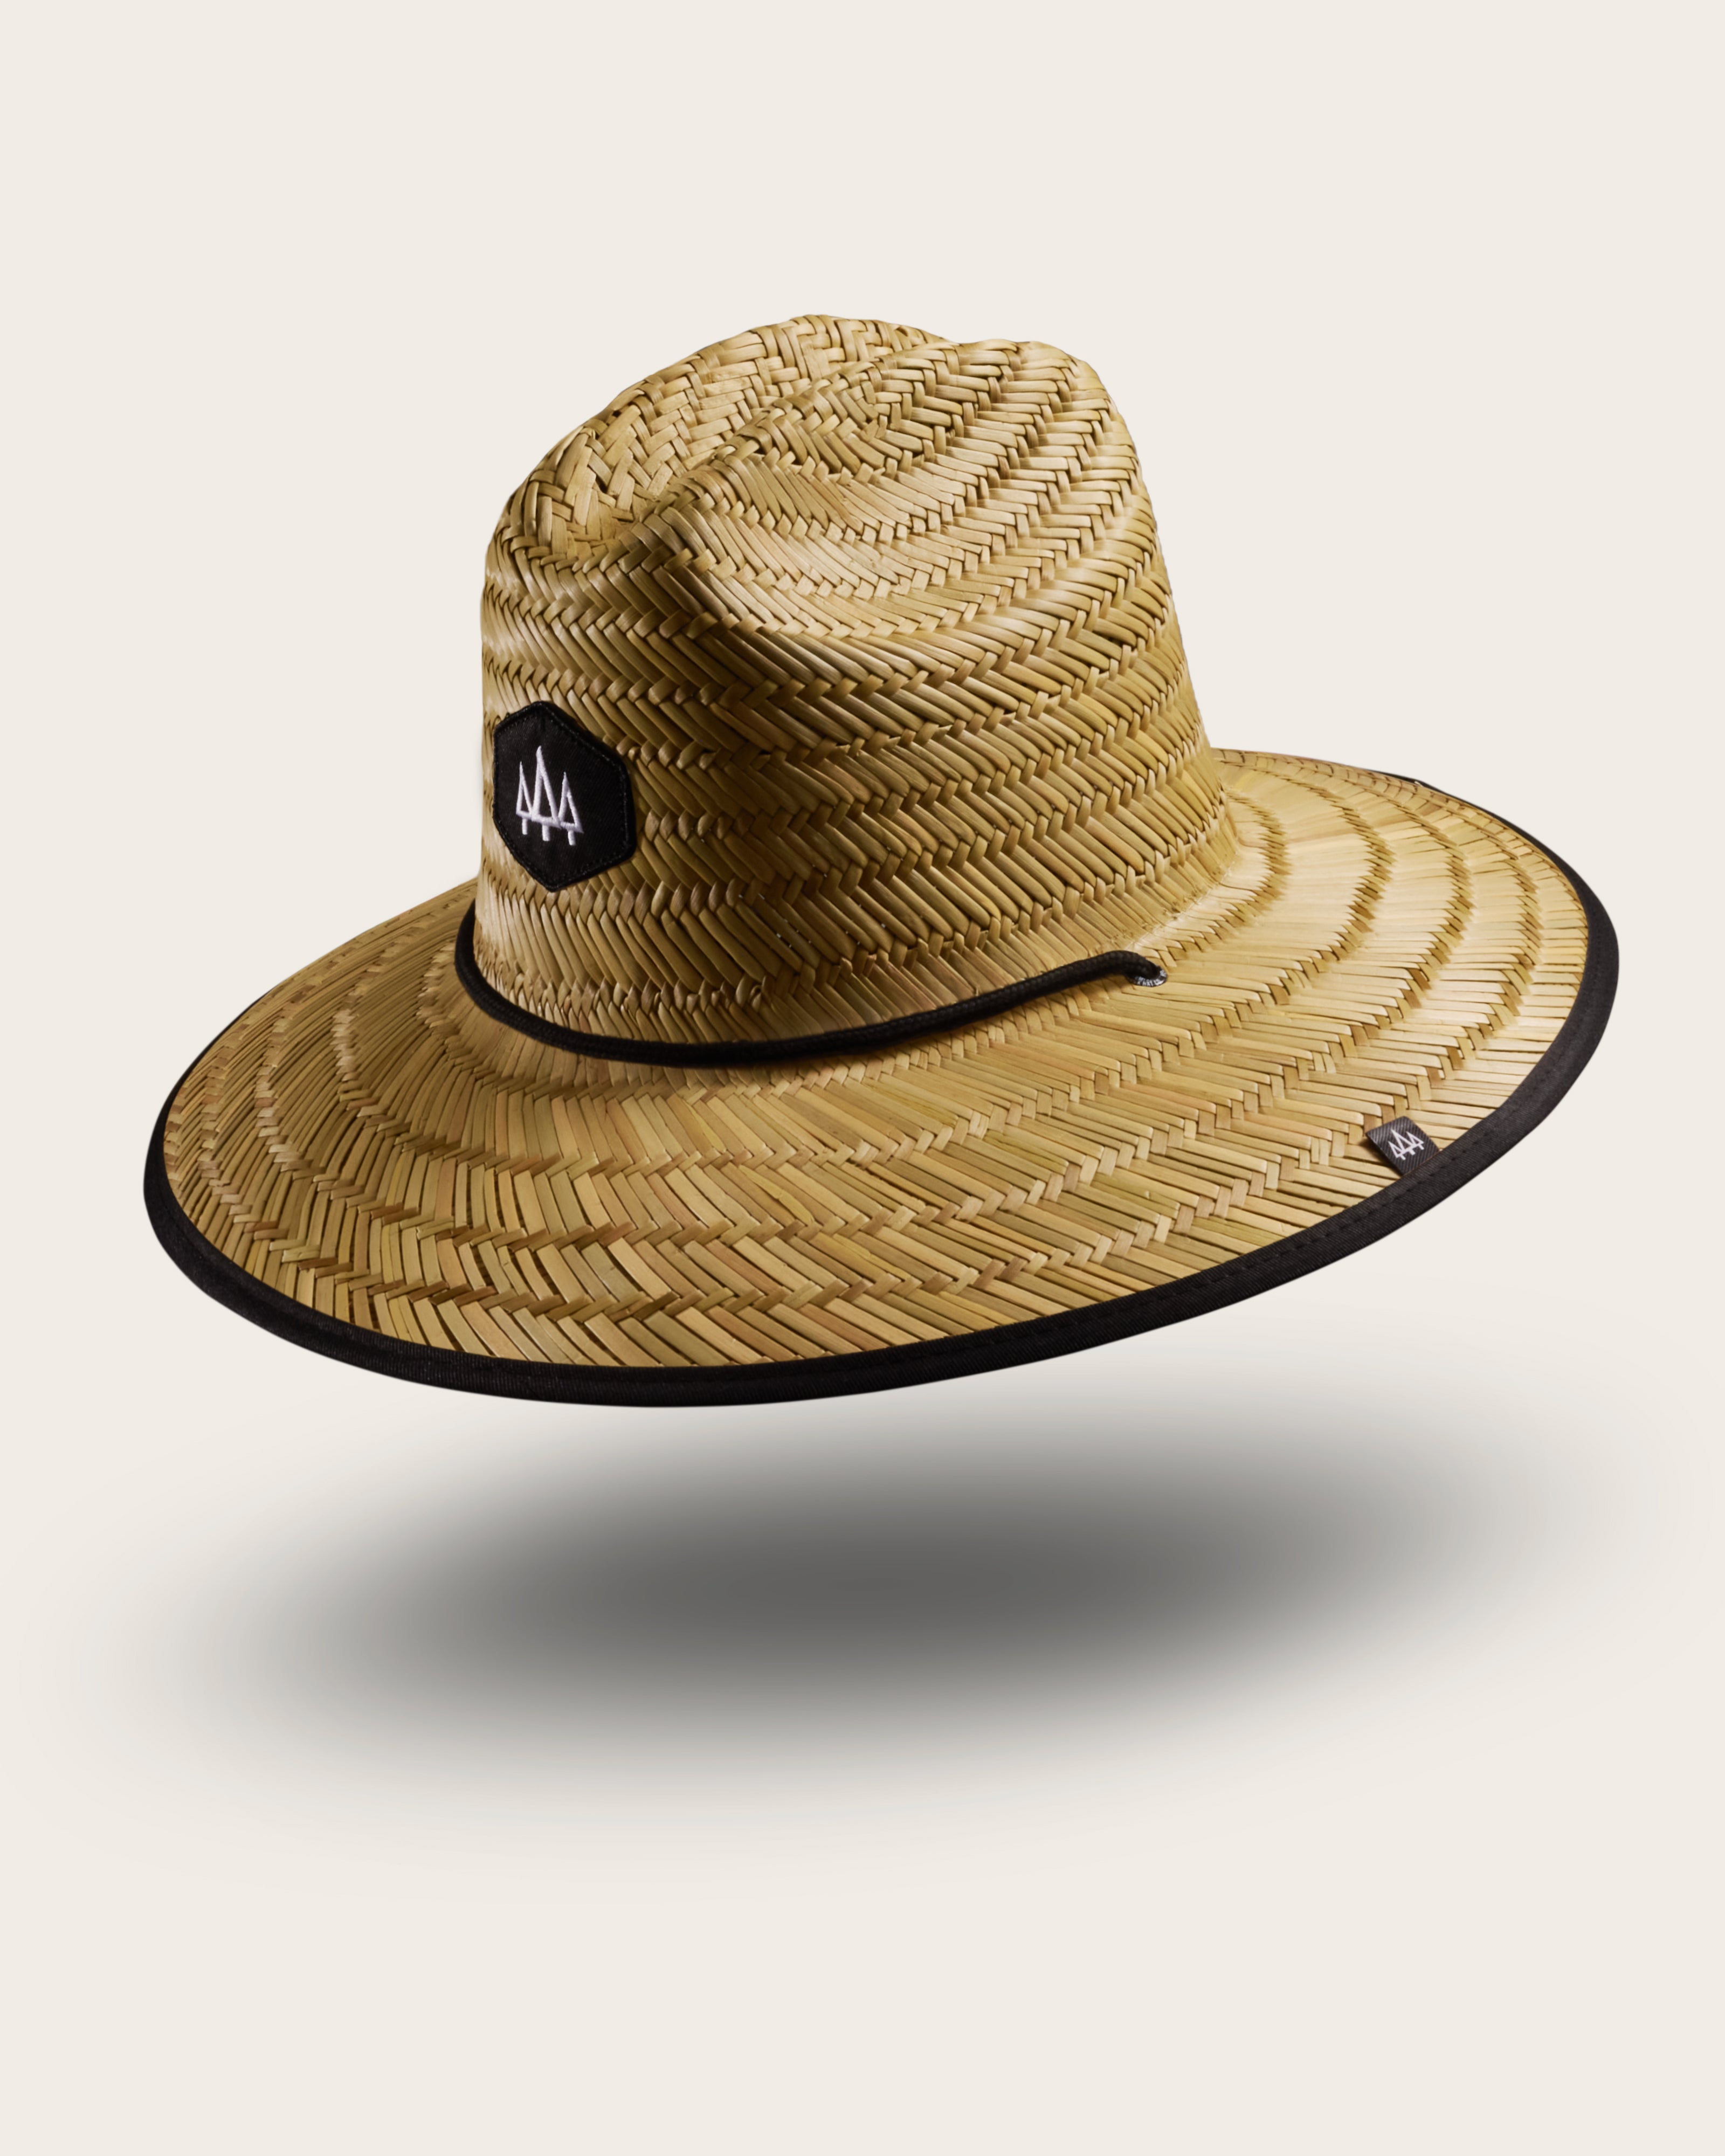 Hemlock Midnight straw lifeguard hat with black color with patch